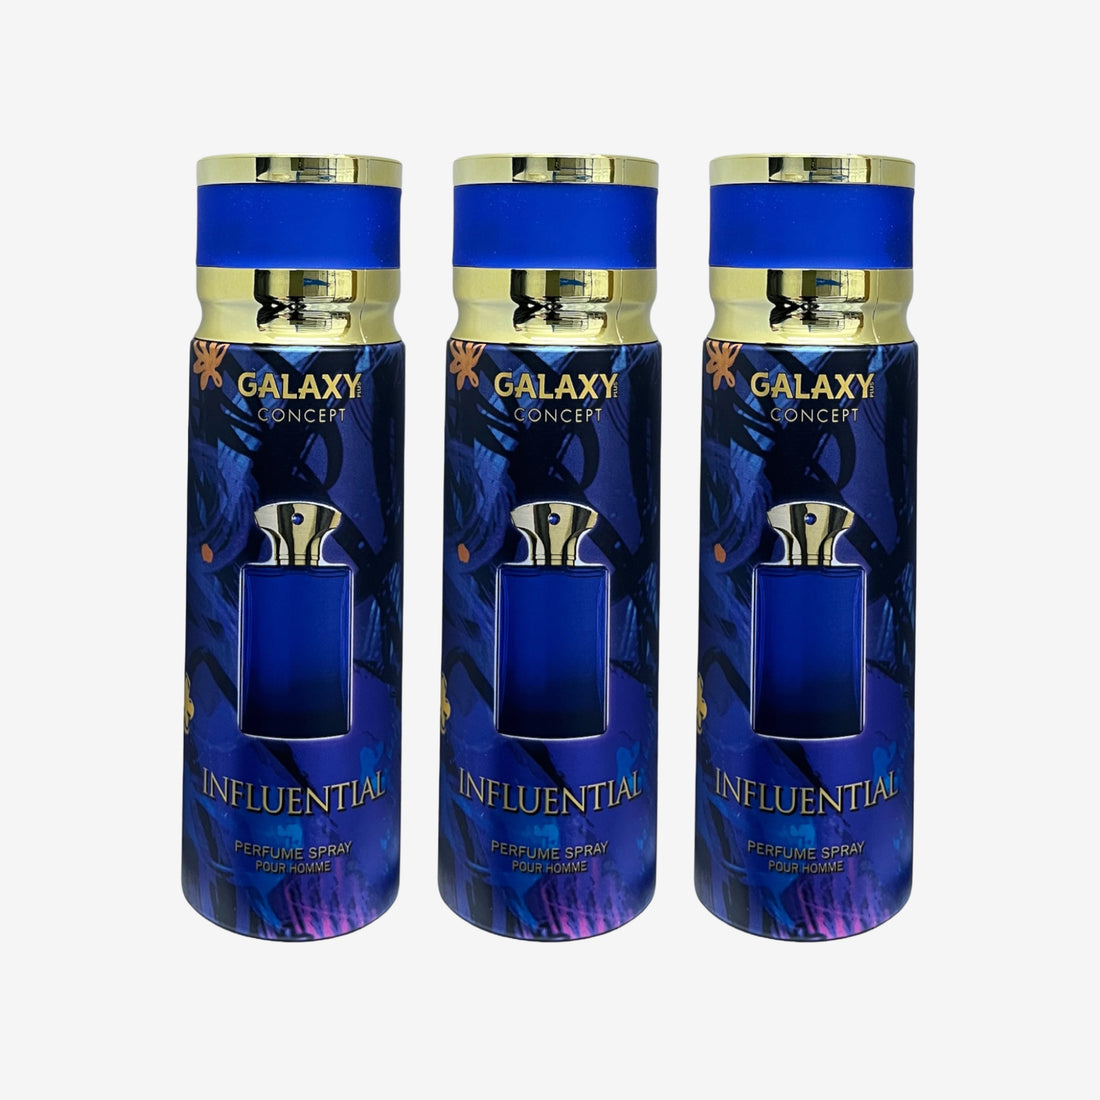 Galaxy Plus Concept INFLUENTIAL Perfume Body Spray - Inspired By Interlude Man